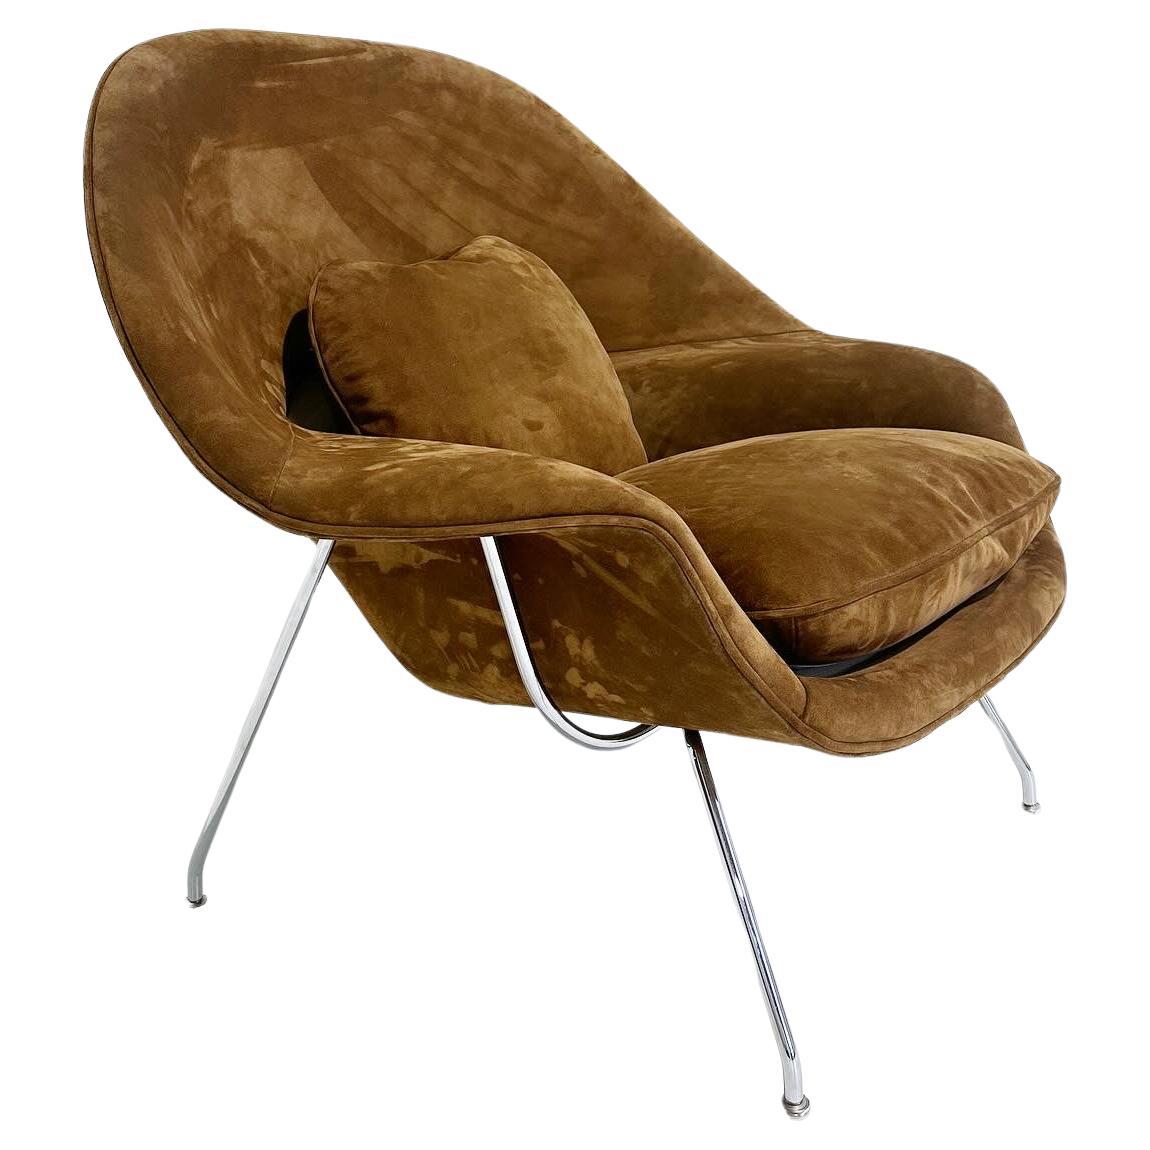 Forsyth Bespoke Eero Saarinen Womb Chair and Ottoman in Suede For Sale